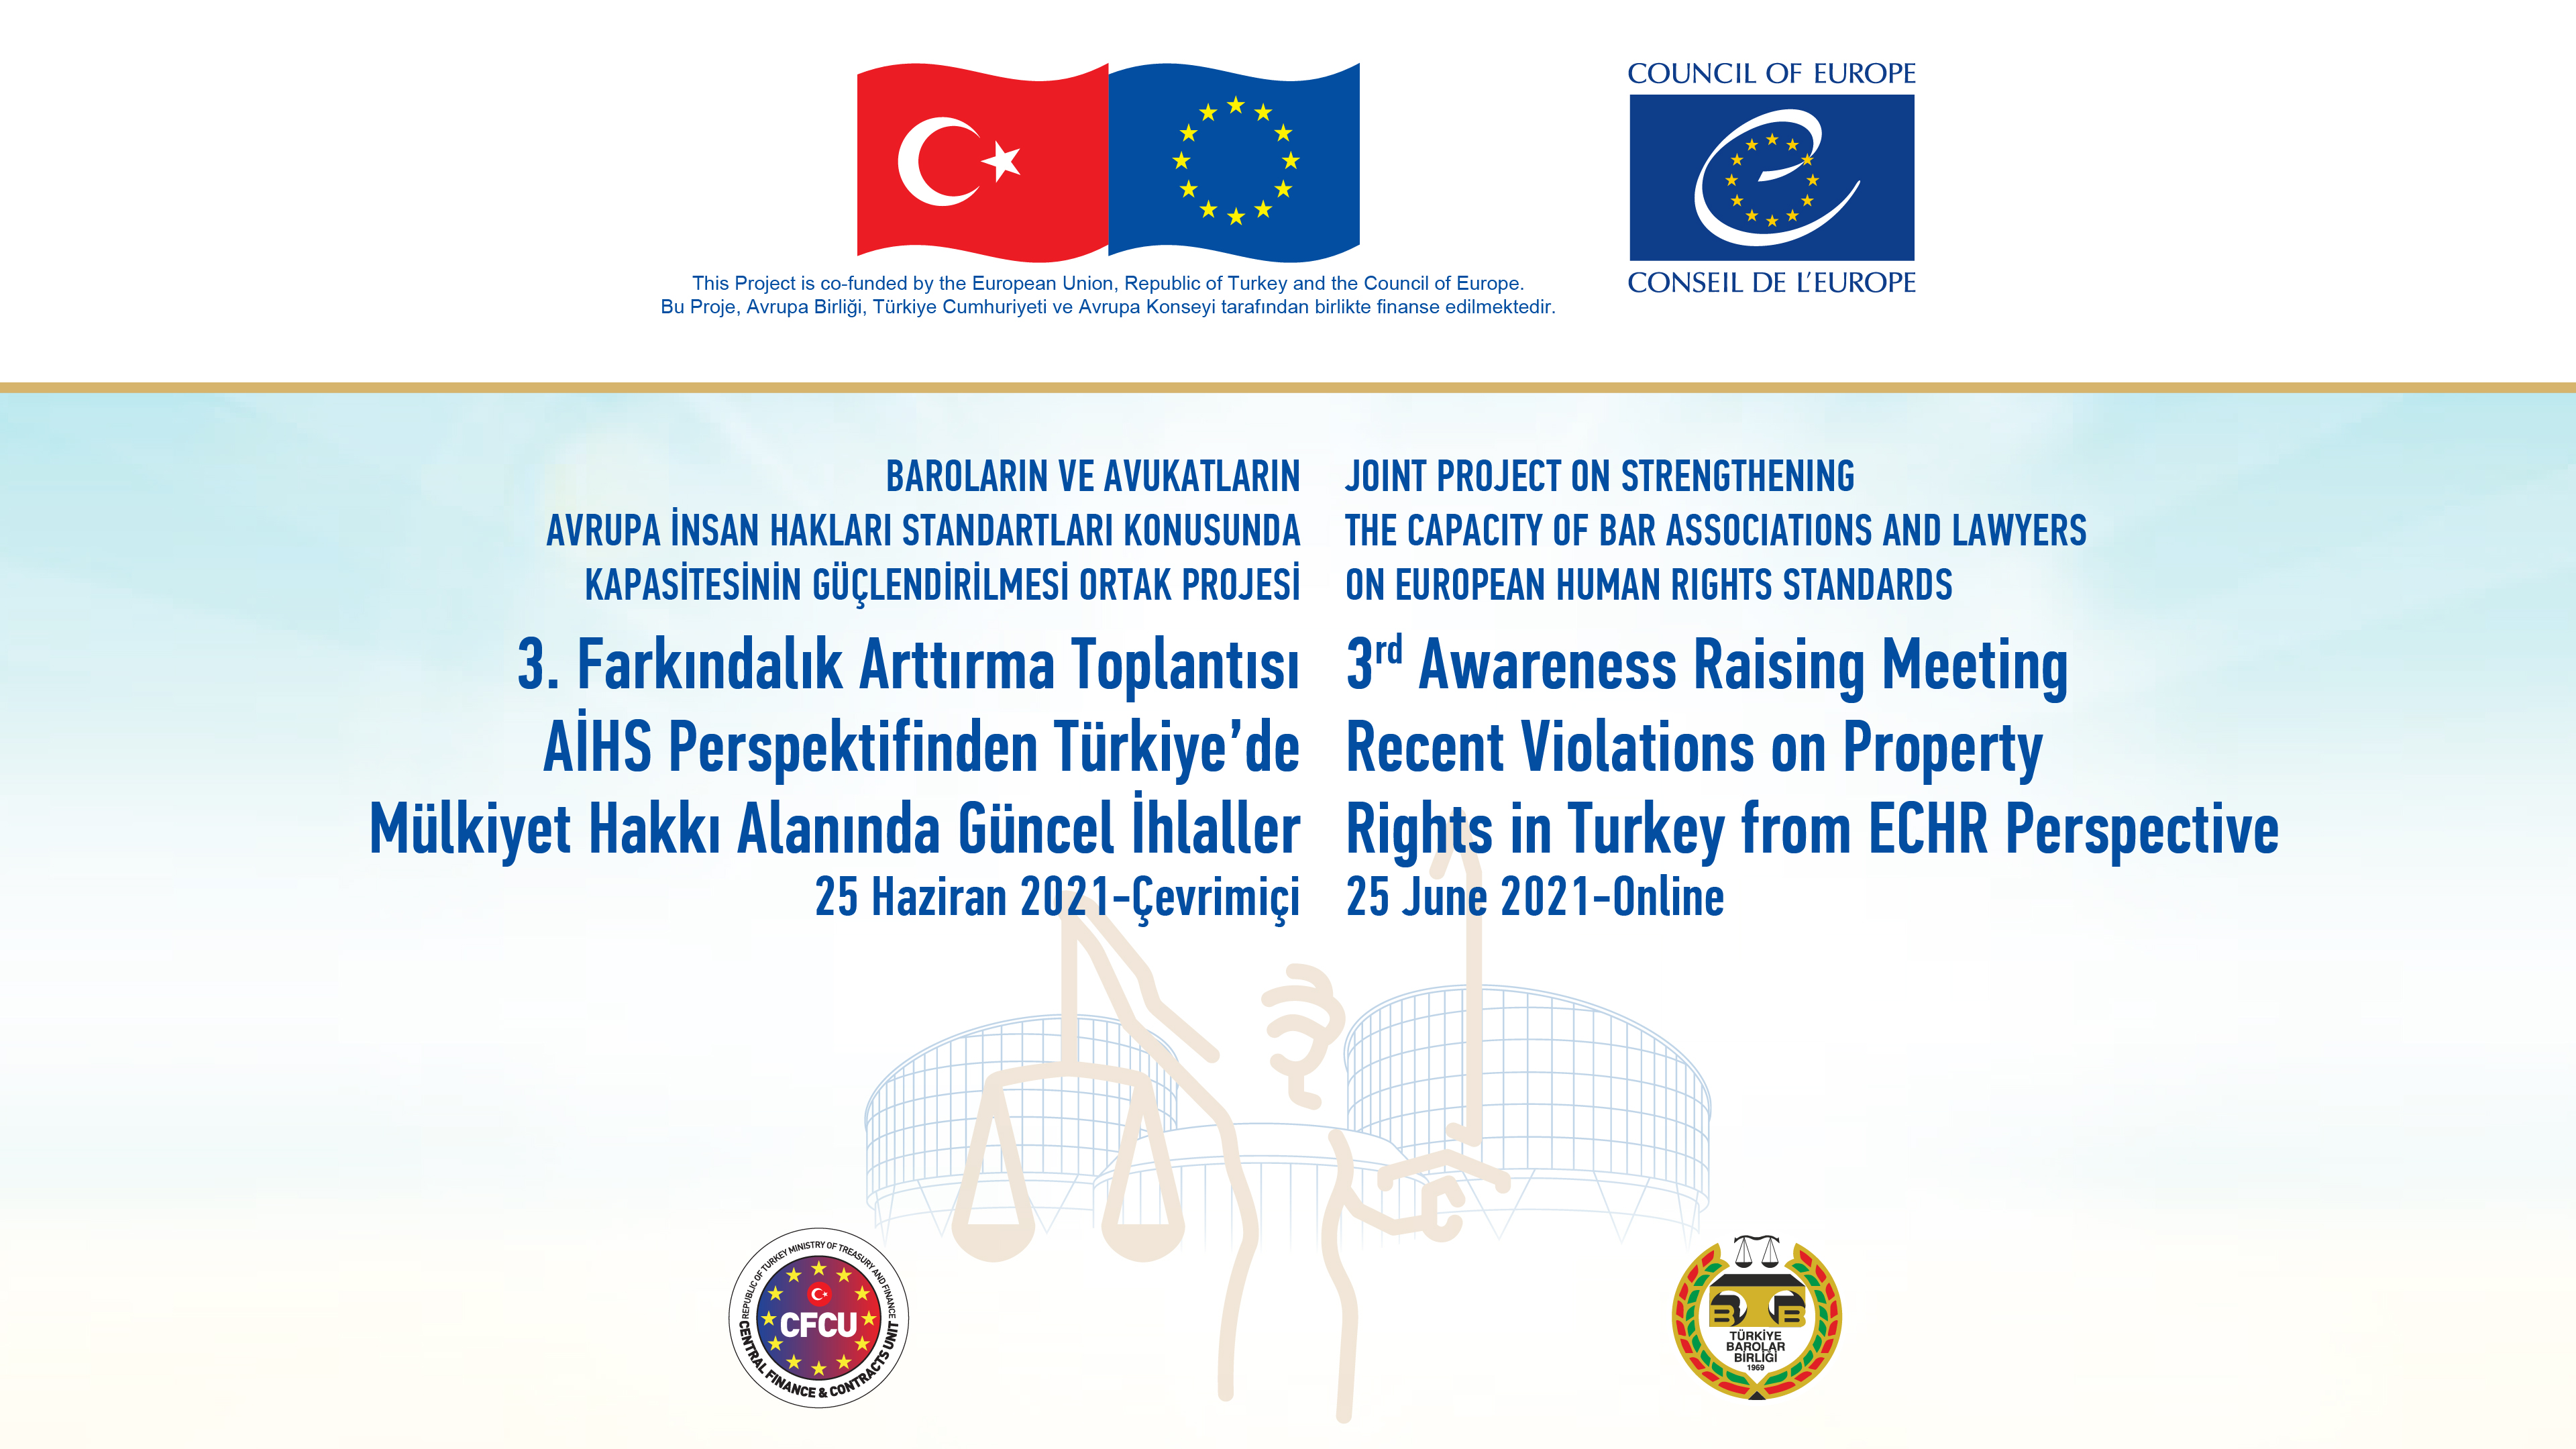 Strengthening the Capacity of Bar Associations and Lawyers on European Human Rights Standards Project organised its 3rd Awareness Raising Meeting